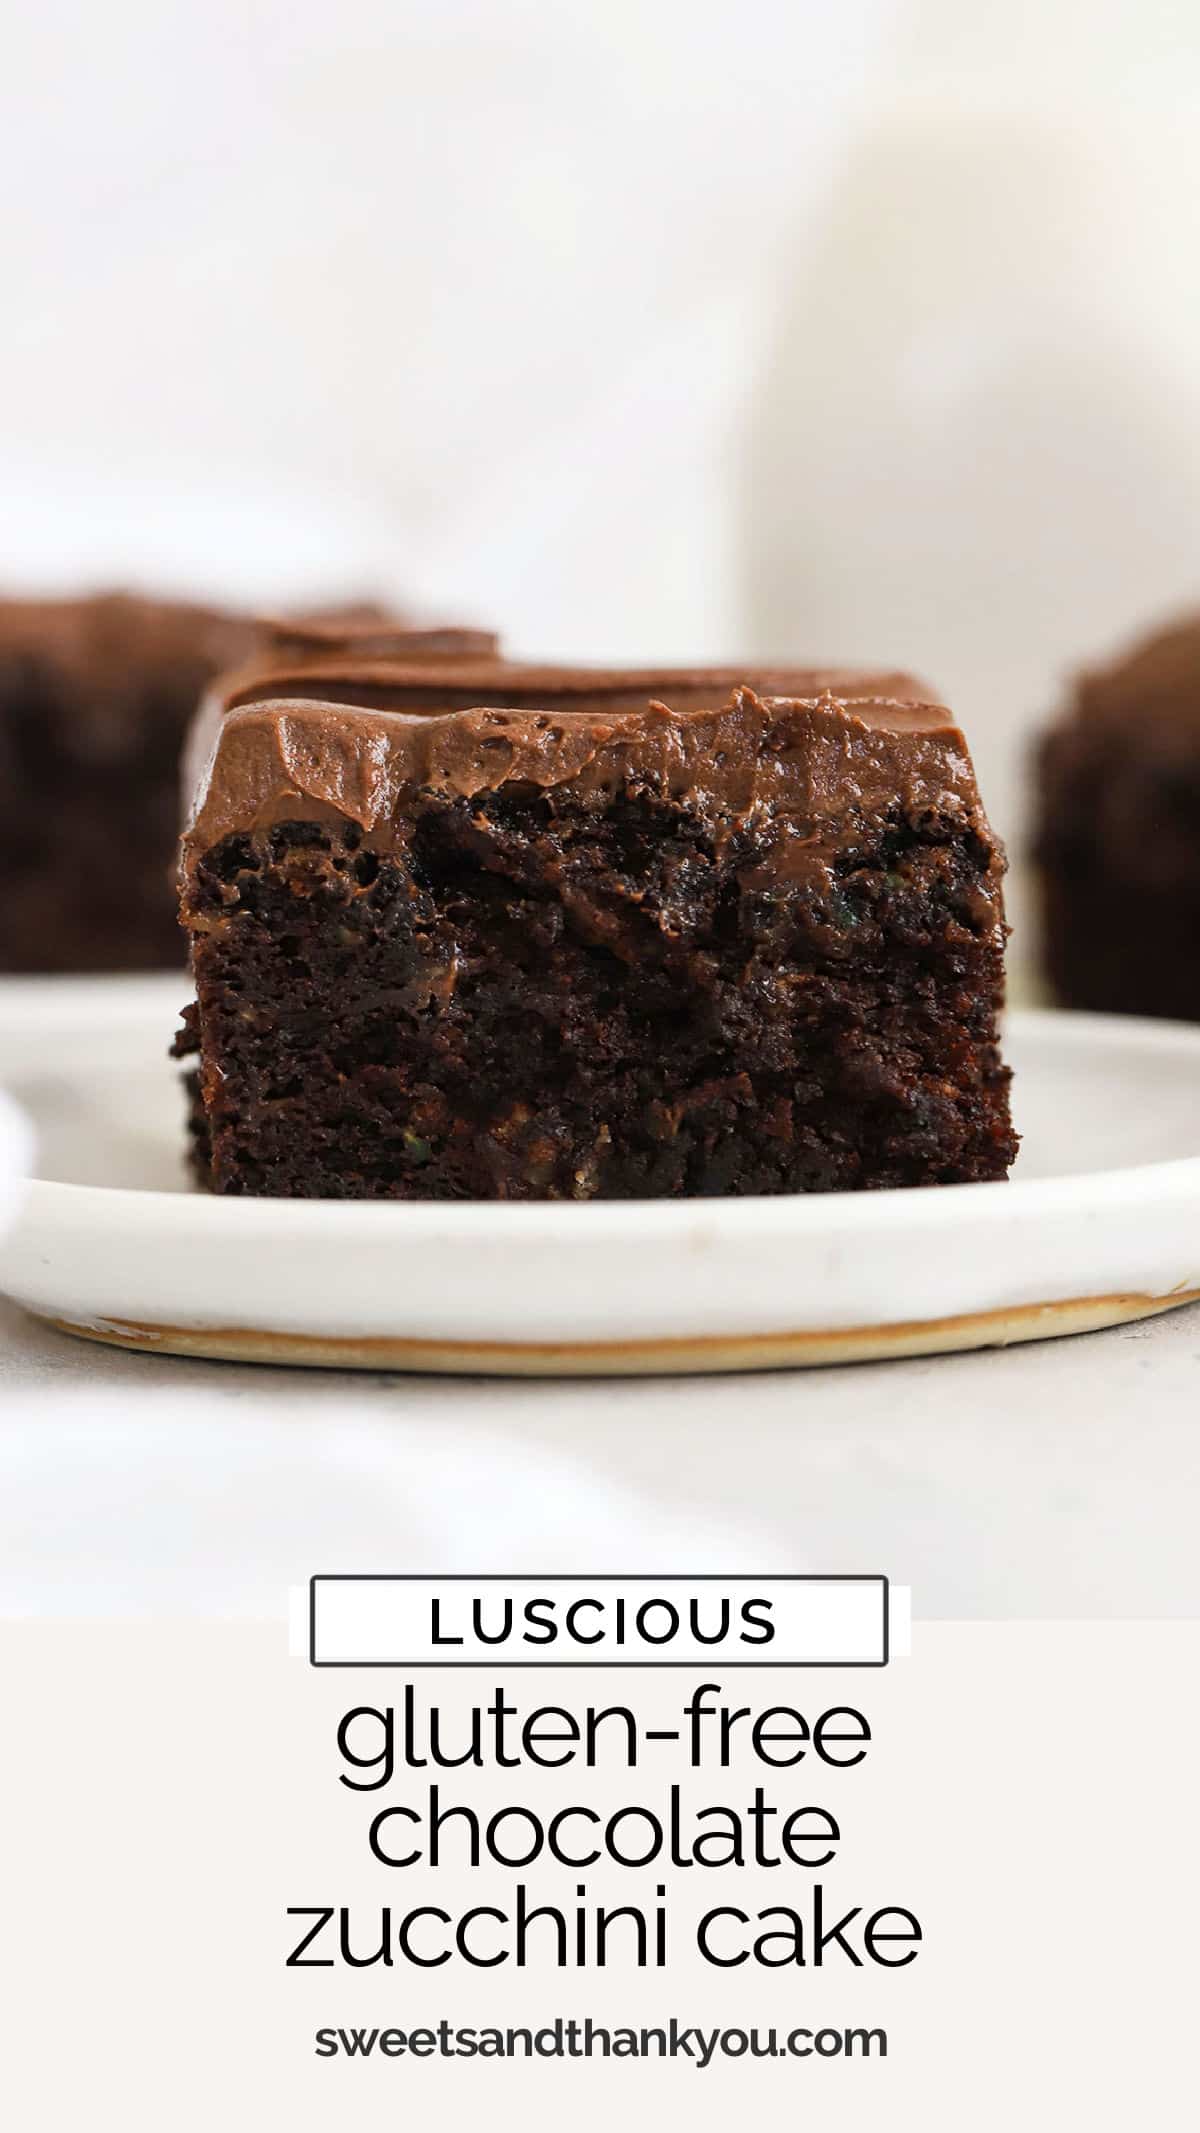 This easy Gluten-Free Chocolate Zucchini Cake recipe is so plush and delicious no one will guess it's gluten-free. (You'll LOVE the chocolate frosting!) / gluten free chocolate zucchini cake with chocolate frosting / gluten free chocolate zucchini sheet cake / gluten free chocolate sheet cake / easy gluten free cake recipe / gluten-free zucchini cake recipe / chocolate frosting for zucchini cake / zucchini sheet cake / gluten free zucchini sheet cake